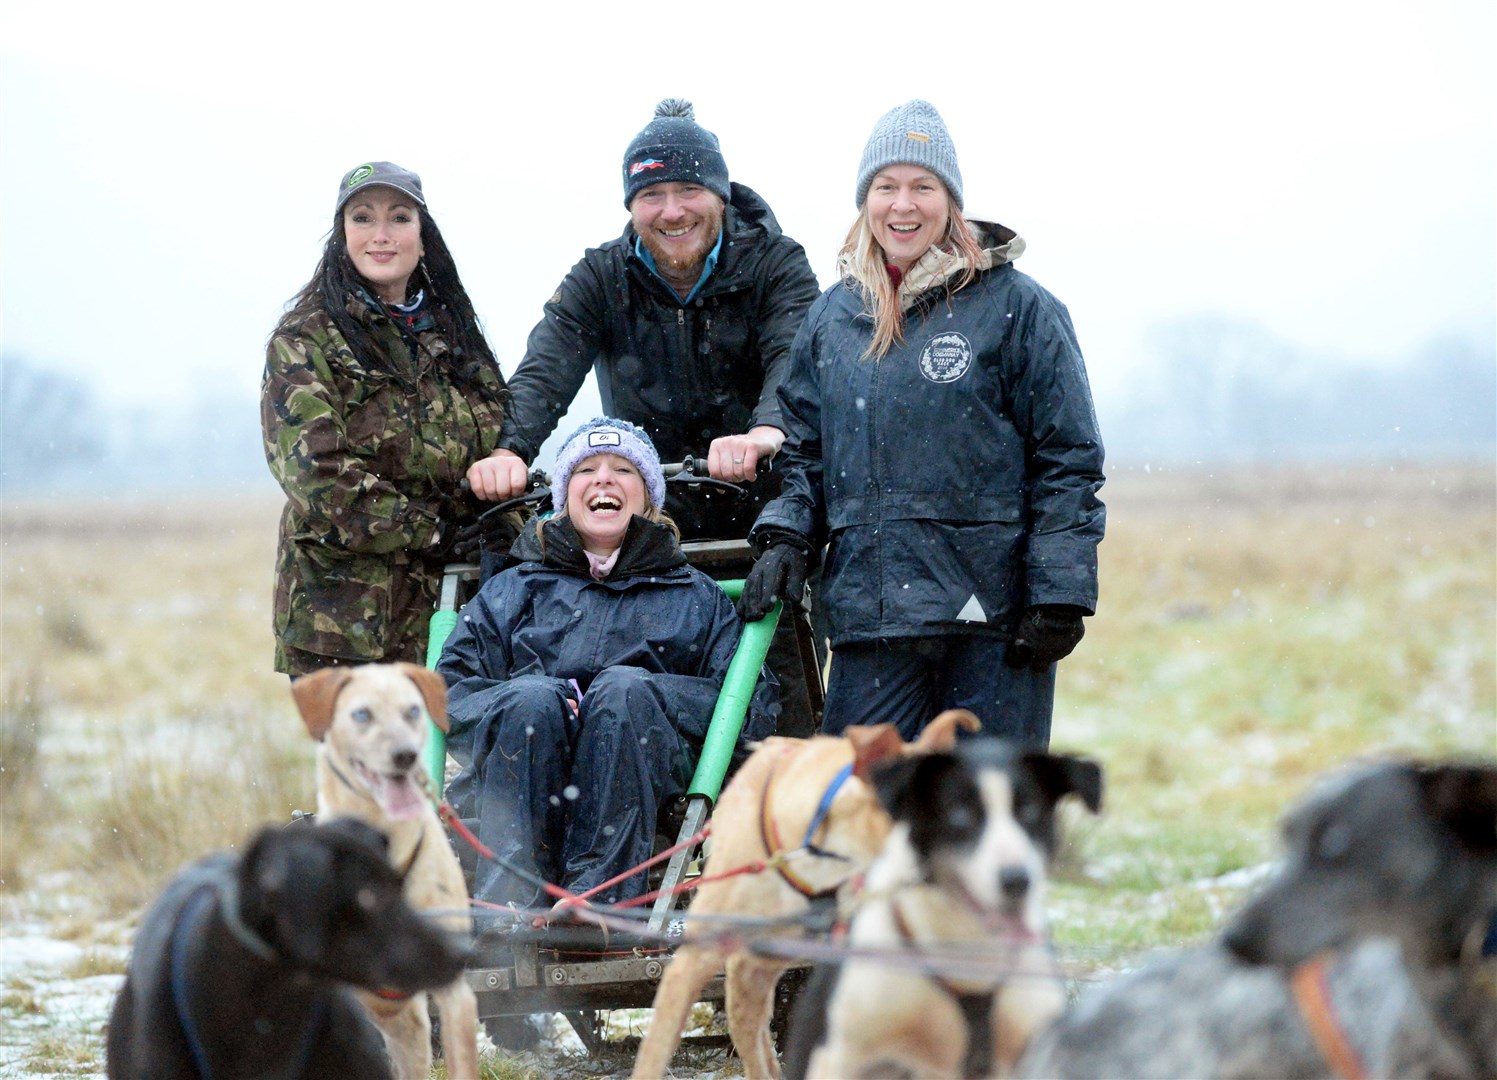 Suzi Macdonald and Jenny Keys head to Leask Racing Sled Dog Adventures to train for their Lapland Husky Trial: Amanda Leask and Tobias Leask from Leask Racing Sled Dog Adventures with Jenny Keys and Suzi Macdonald. Picture: James Mackenzie.